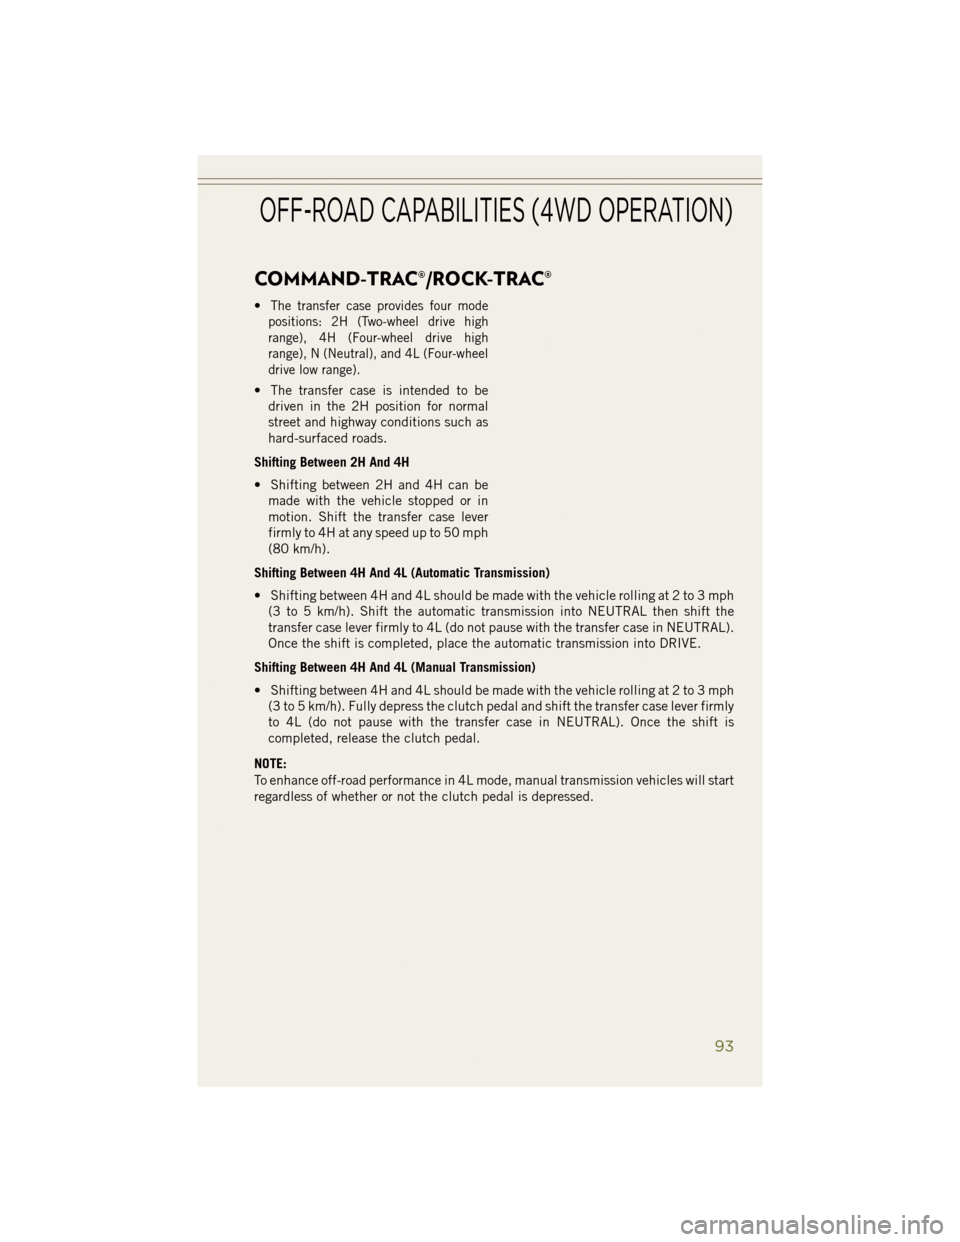 JEEP WRANGLER 2014 JK / 3.G User Guide COMMAND-TRAC®/ROCK-TRAC®
•The transfer case provides four mode
positions: 2H (Two-wheel drive high
range), 4H (Four-wheel drive high
range), N (Neutral), and 4L (Four-wheel
drive low range).
• T